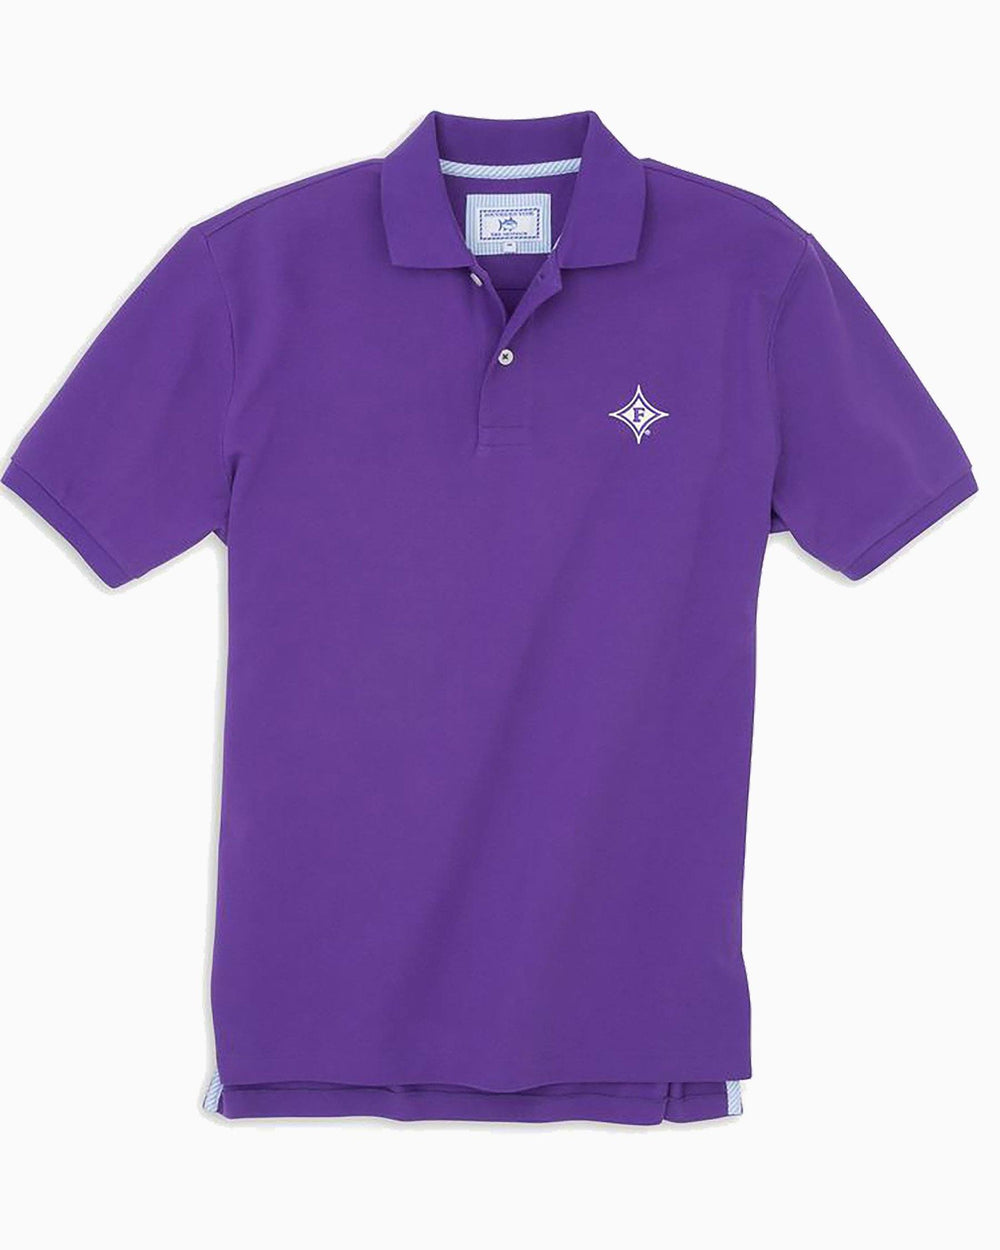 The front view of the Men's Purple Furman Pique Polo Shirt by Southern Tide - Regal Purple